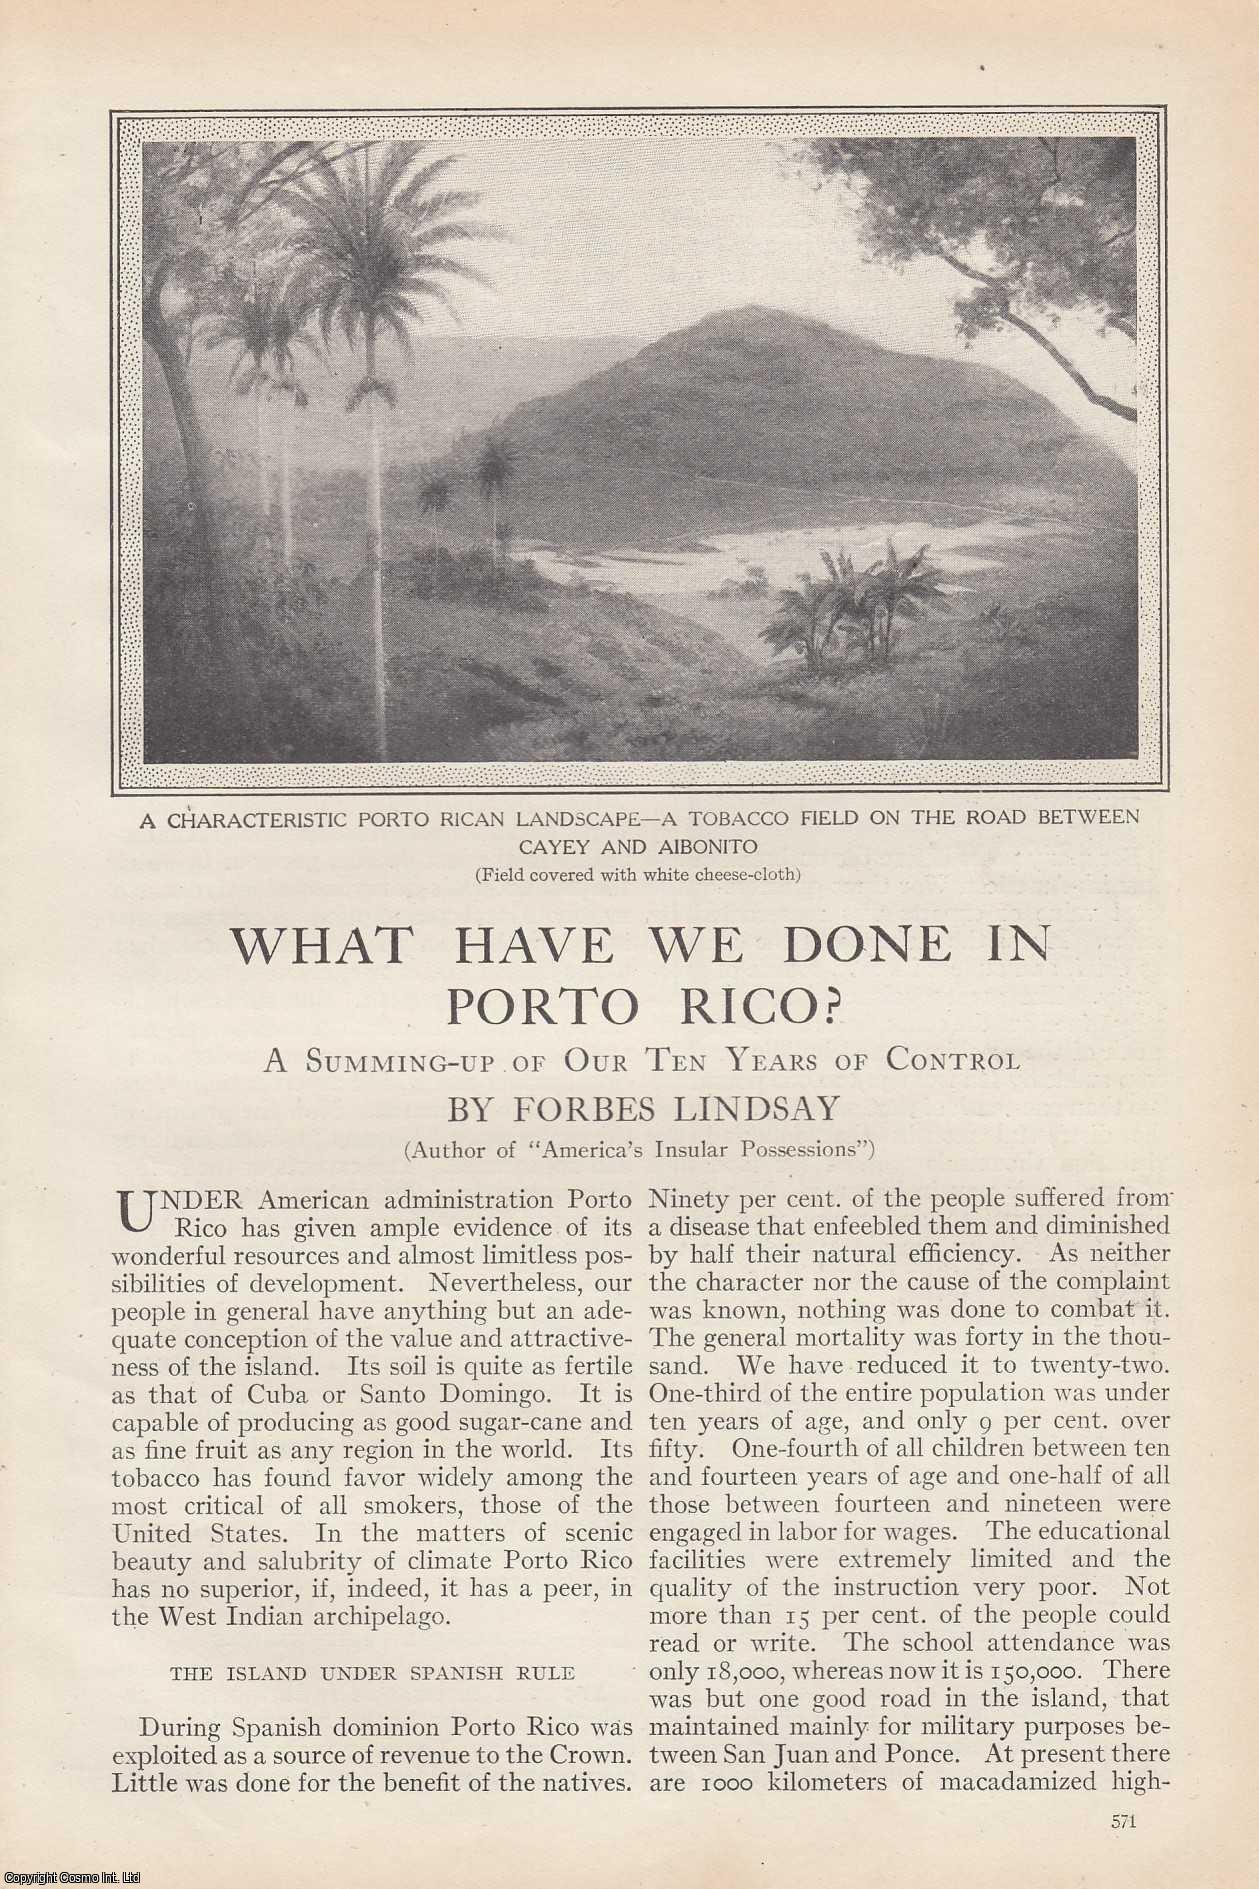 Forbes Lindsay - What Have We Done in Porto (Puerto) Rico: Ten Years of American Administration. An original article from the American Review of Reviews, 1912.